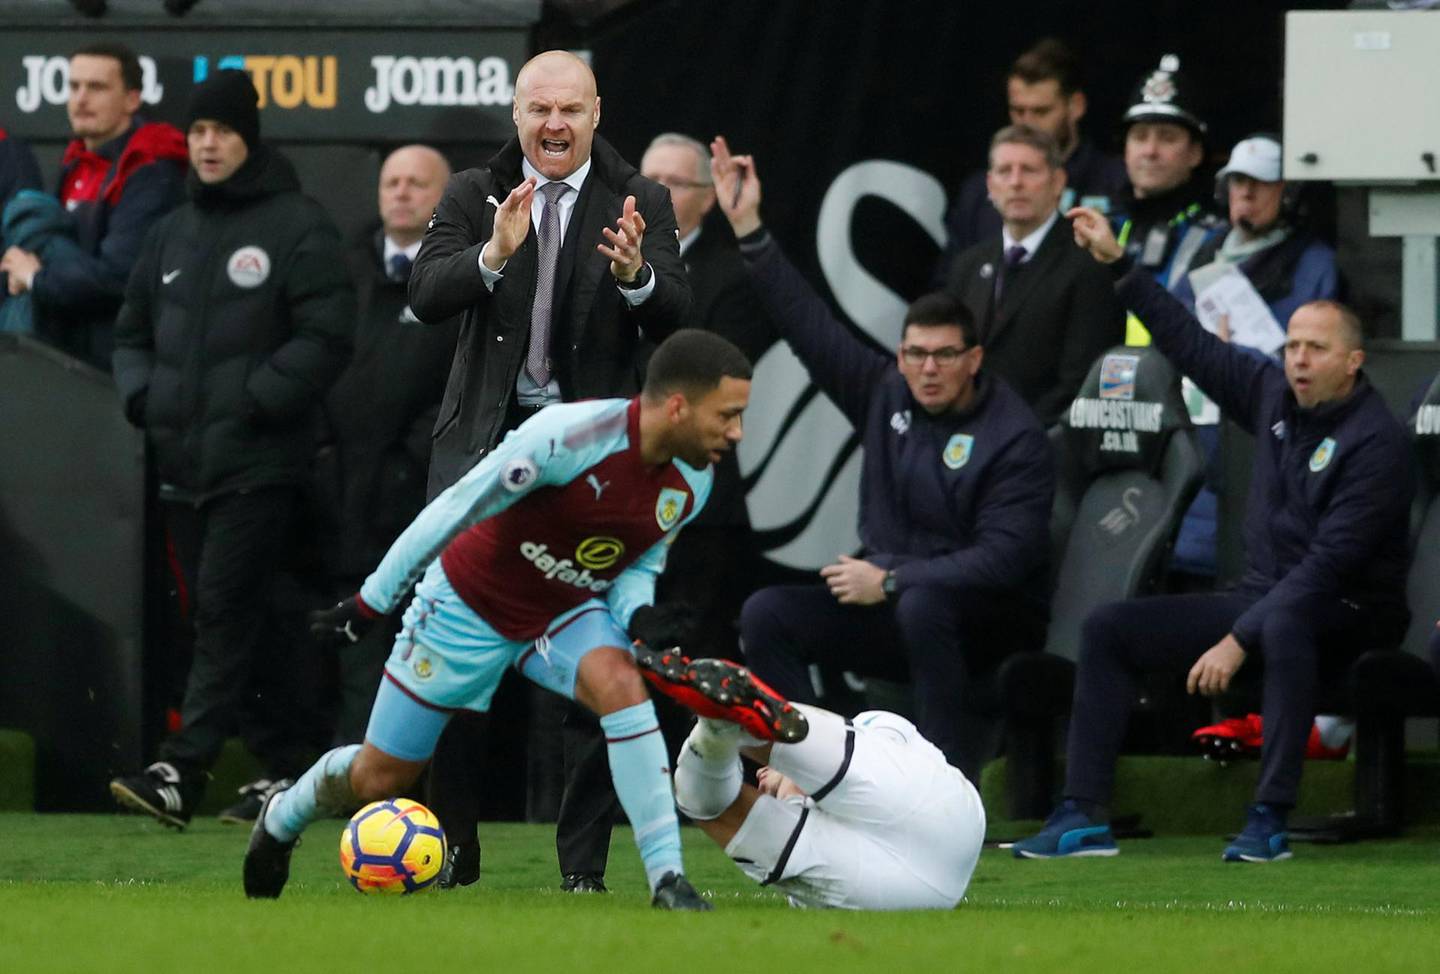 Soccer Football - Premier League - Swansea City vs Burnley - Liberty Stadium, Swansea, Britain - February 10, 2018   Burnley manager Sean Dyche   Action Images via Reuters/Andrew Boyers    EDITORIAL USE ONLY. No use with unauthorized audio, video, data, fixture lists, club/league logos or "live" services. Online in-match use limited to 75 images, no video emulation. No use in betting, games or single club/league/player publications.  Please contact your account representative for further details.